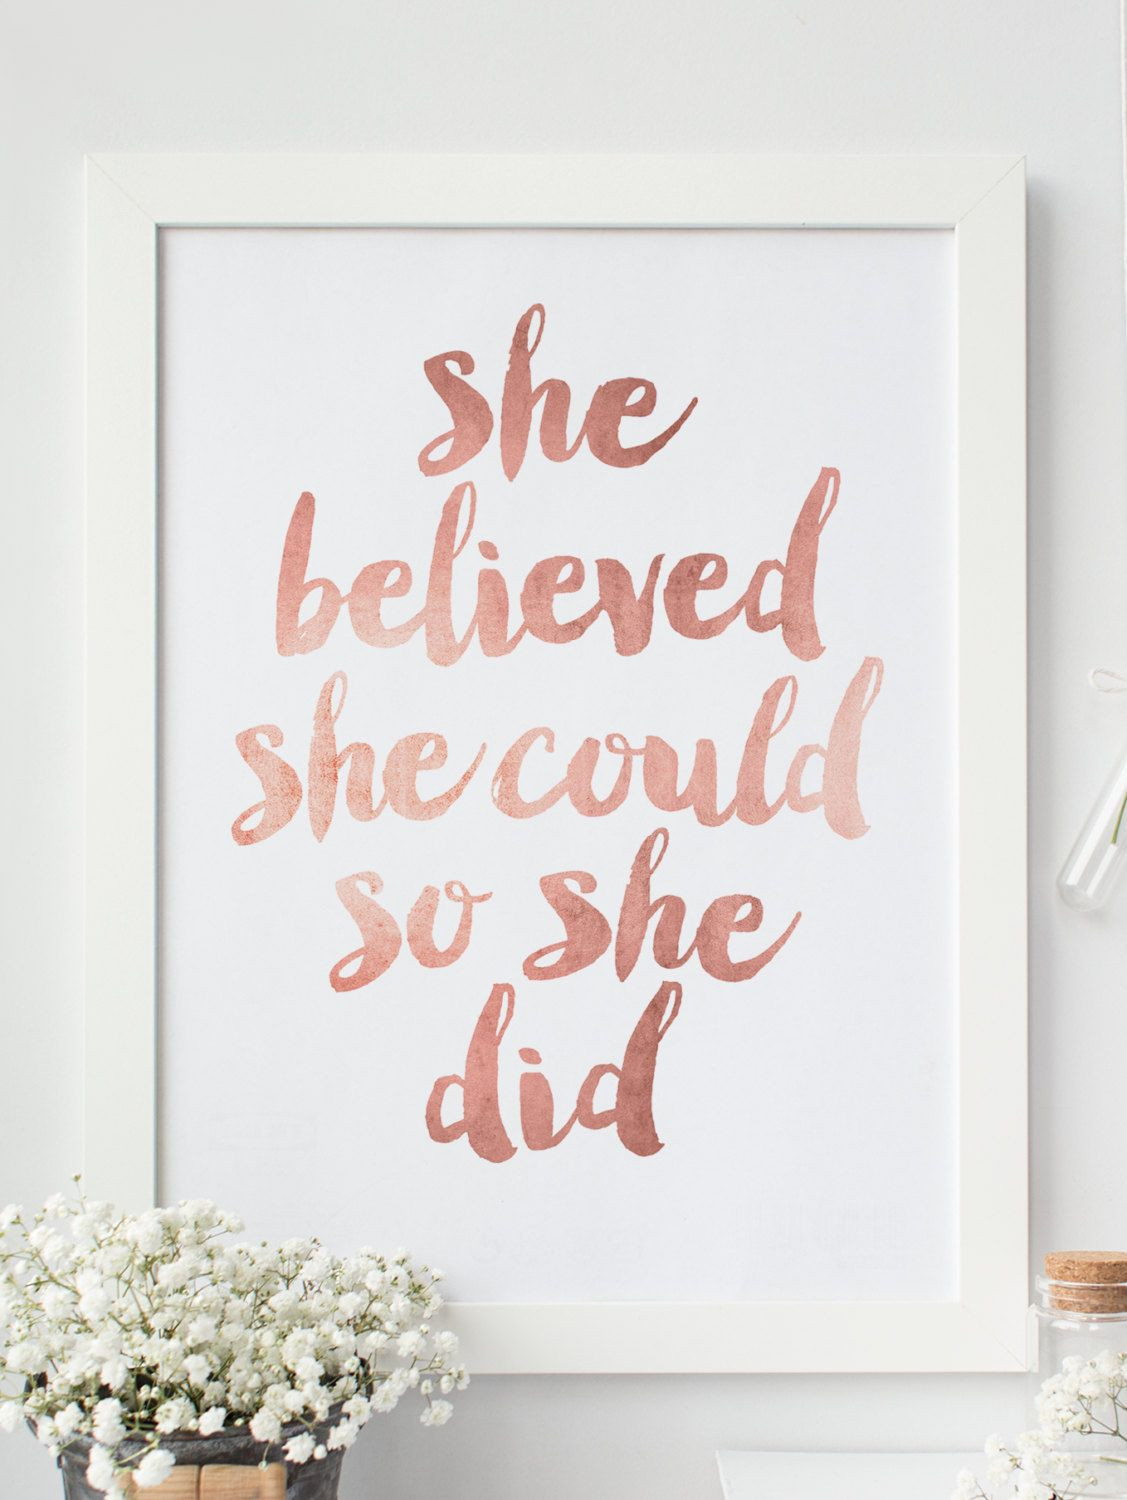 Framed Inspirational Quotes
 Inspirational Print "She Believed She Could So She Did